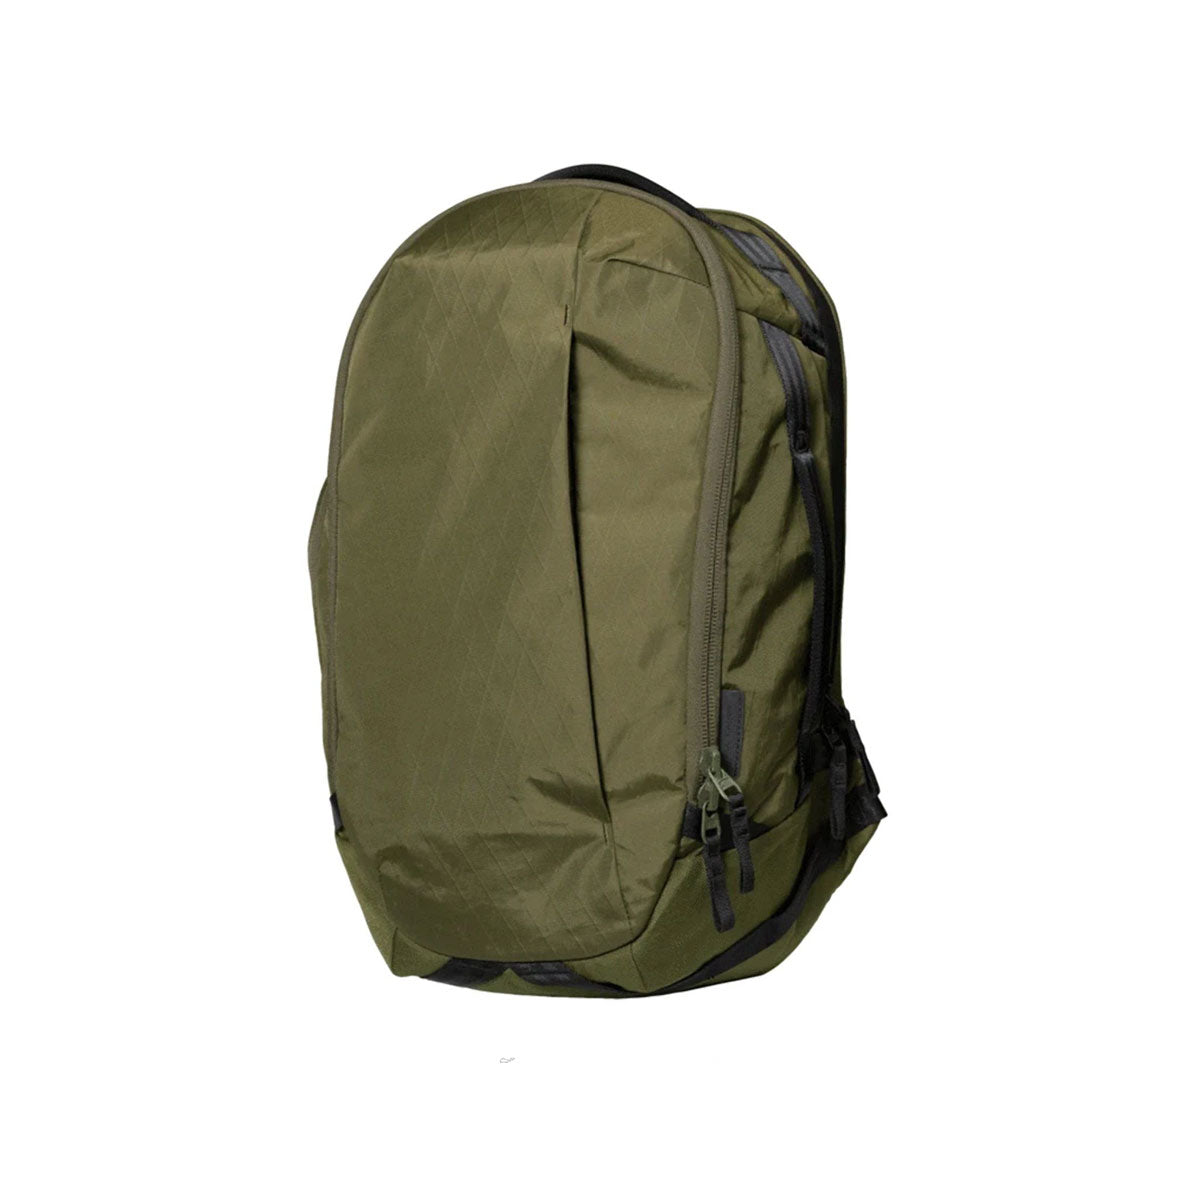 Able Carry : Max Backpack : Earth Green